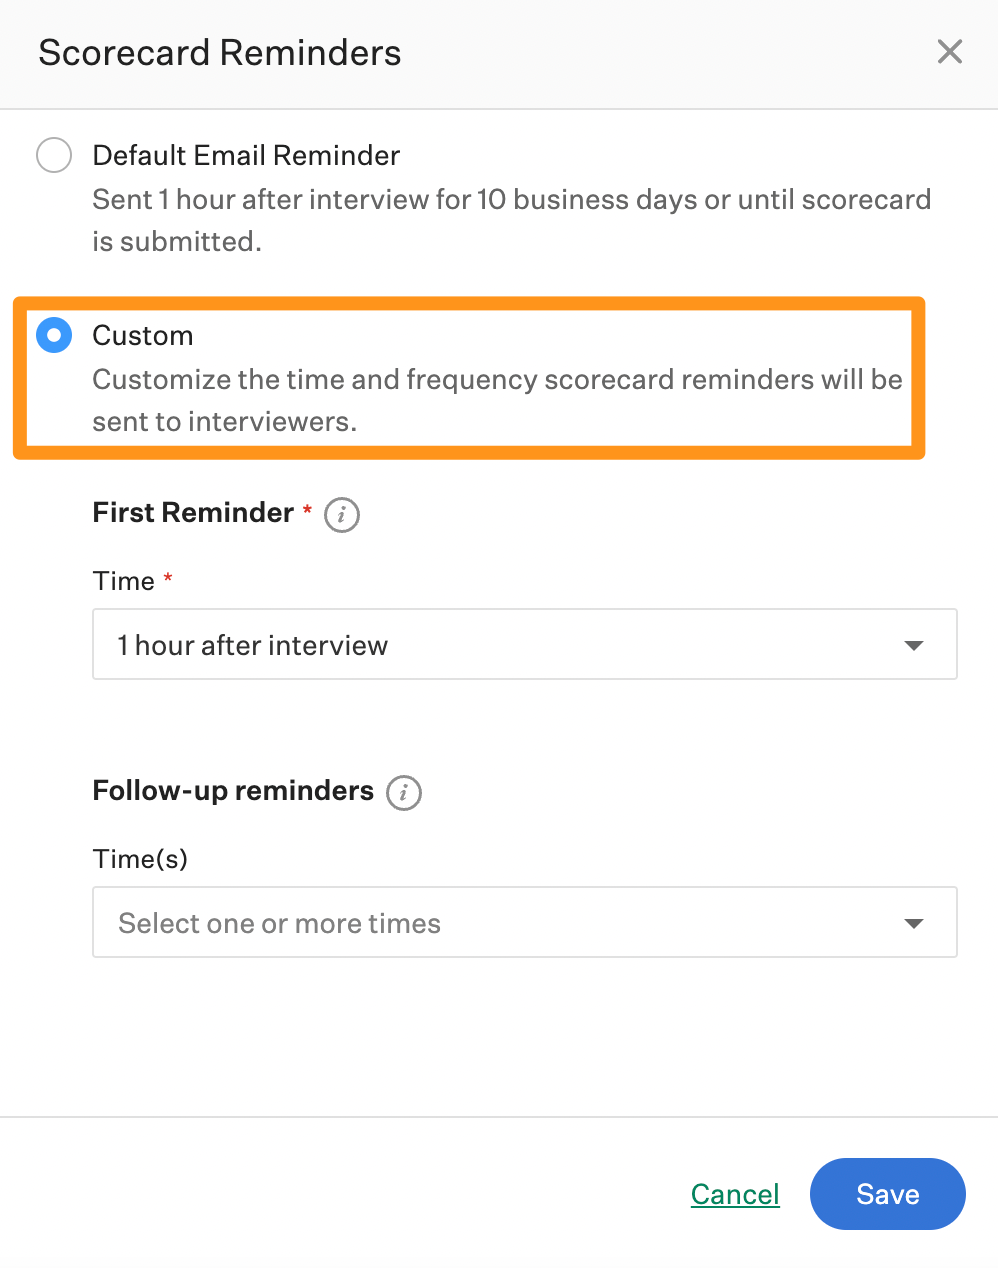 Screenshot of the custom email reminder options